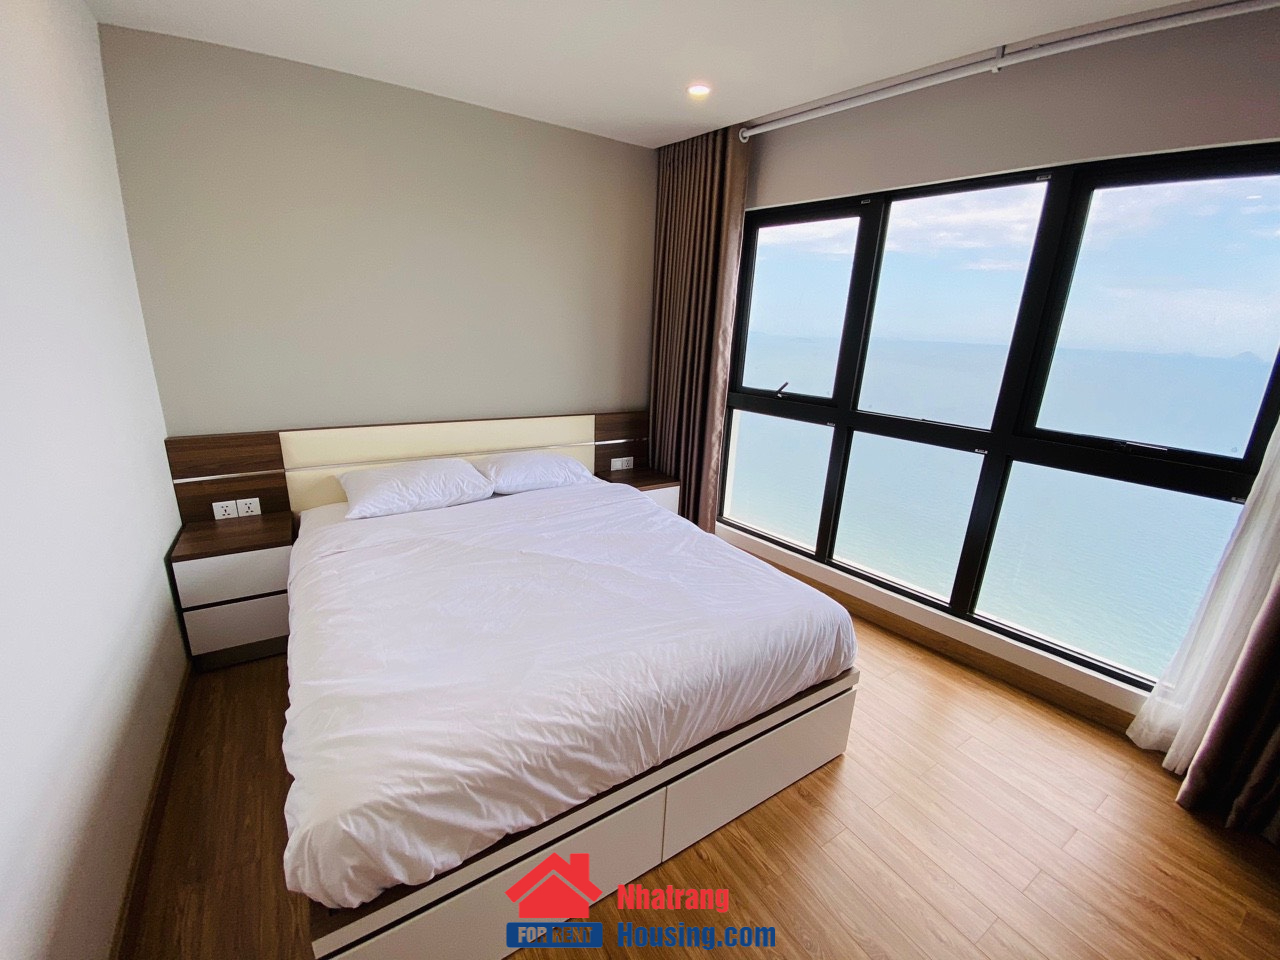 Gold Coast Nha Trang Apartment for rent | Two bedrooms | 70m2 | 1000$ (23 millionVND)